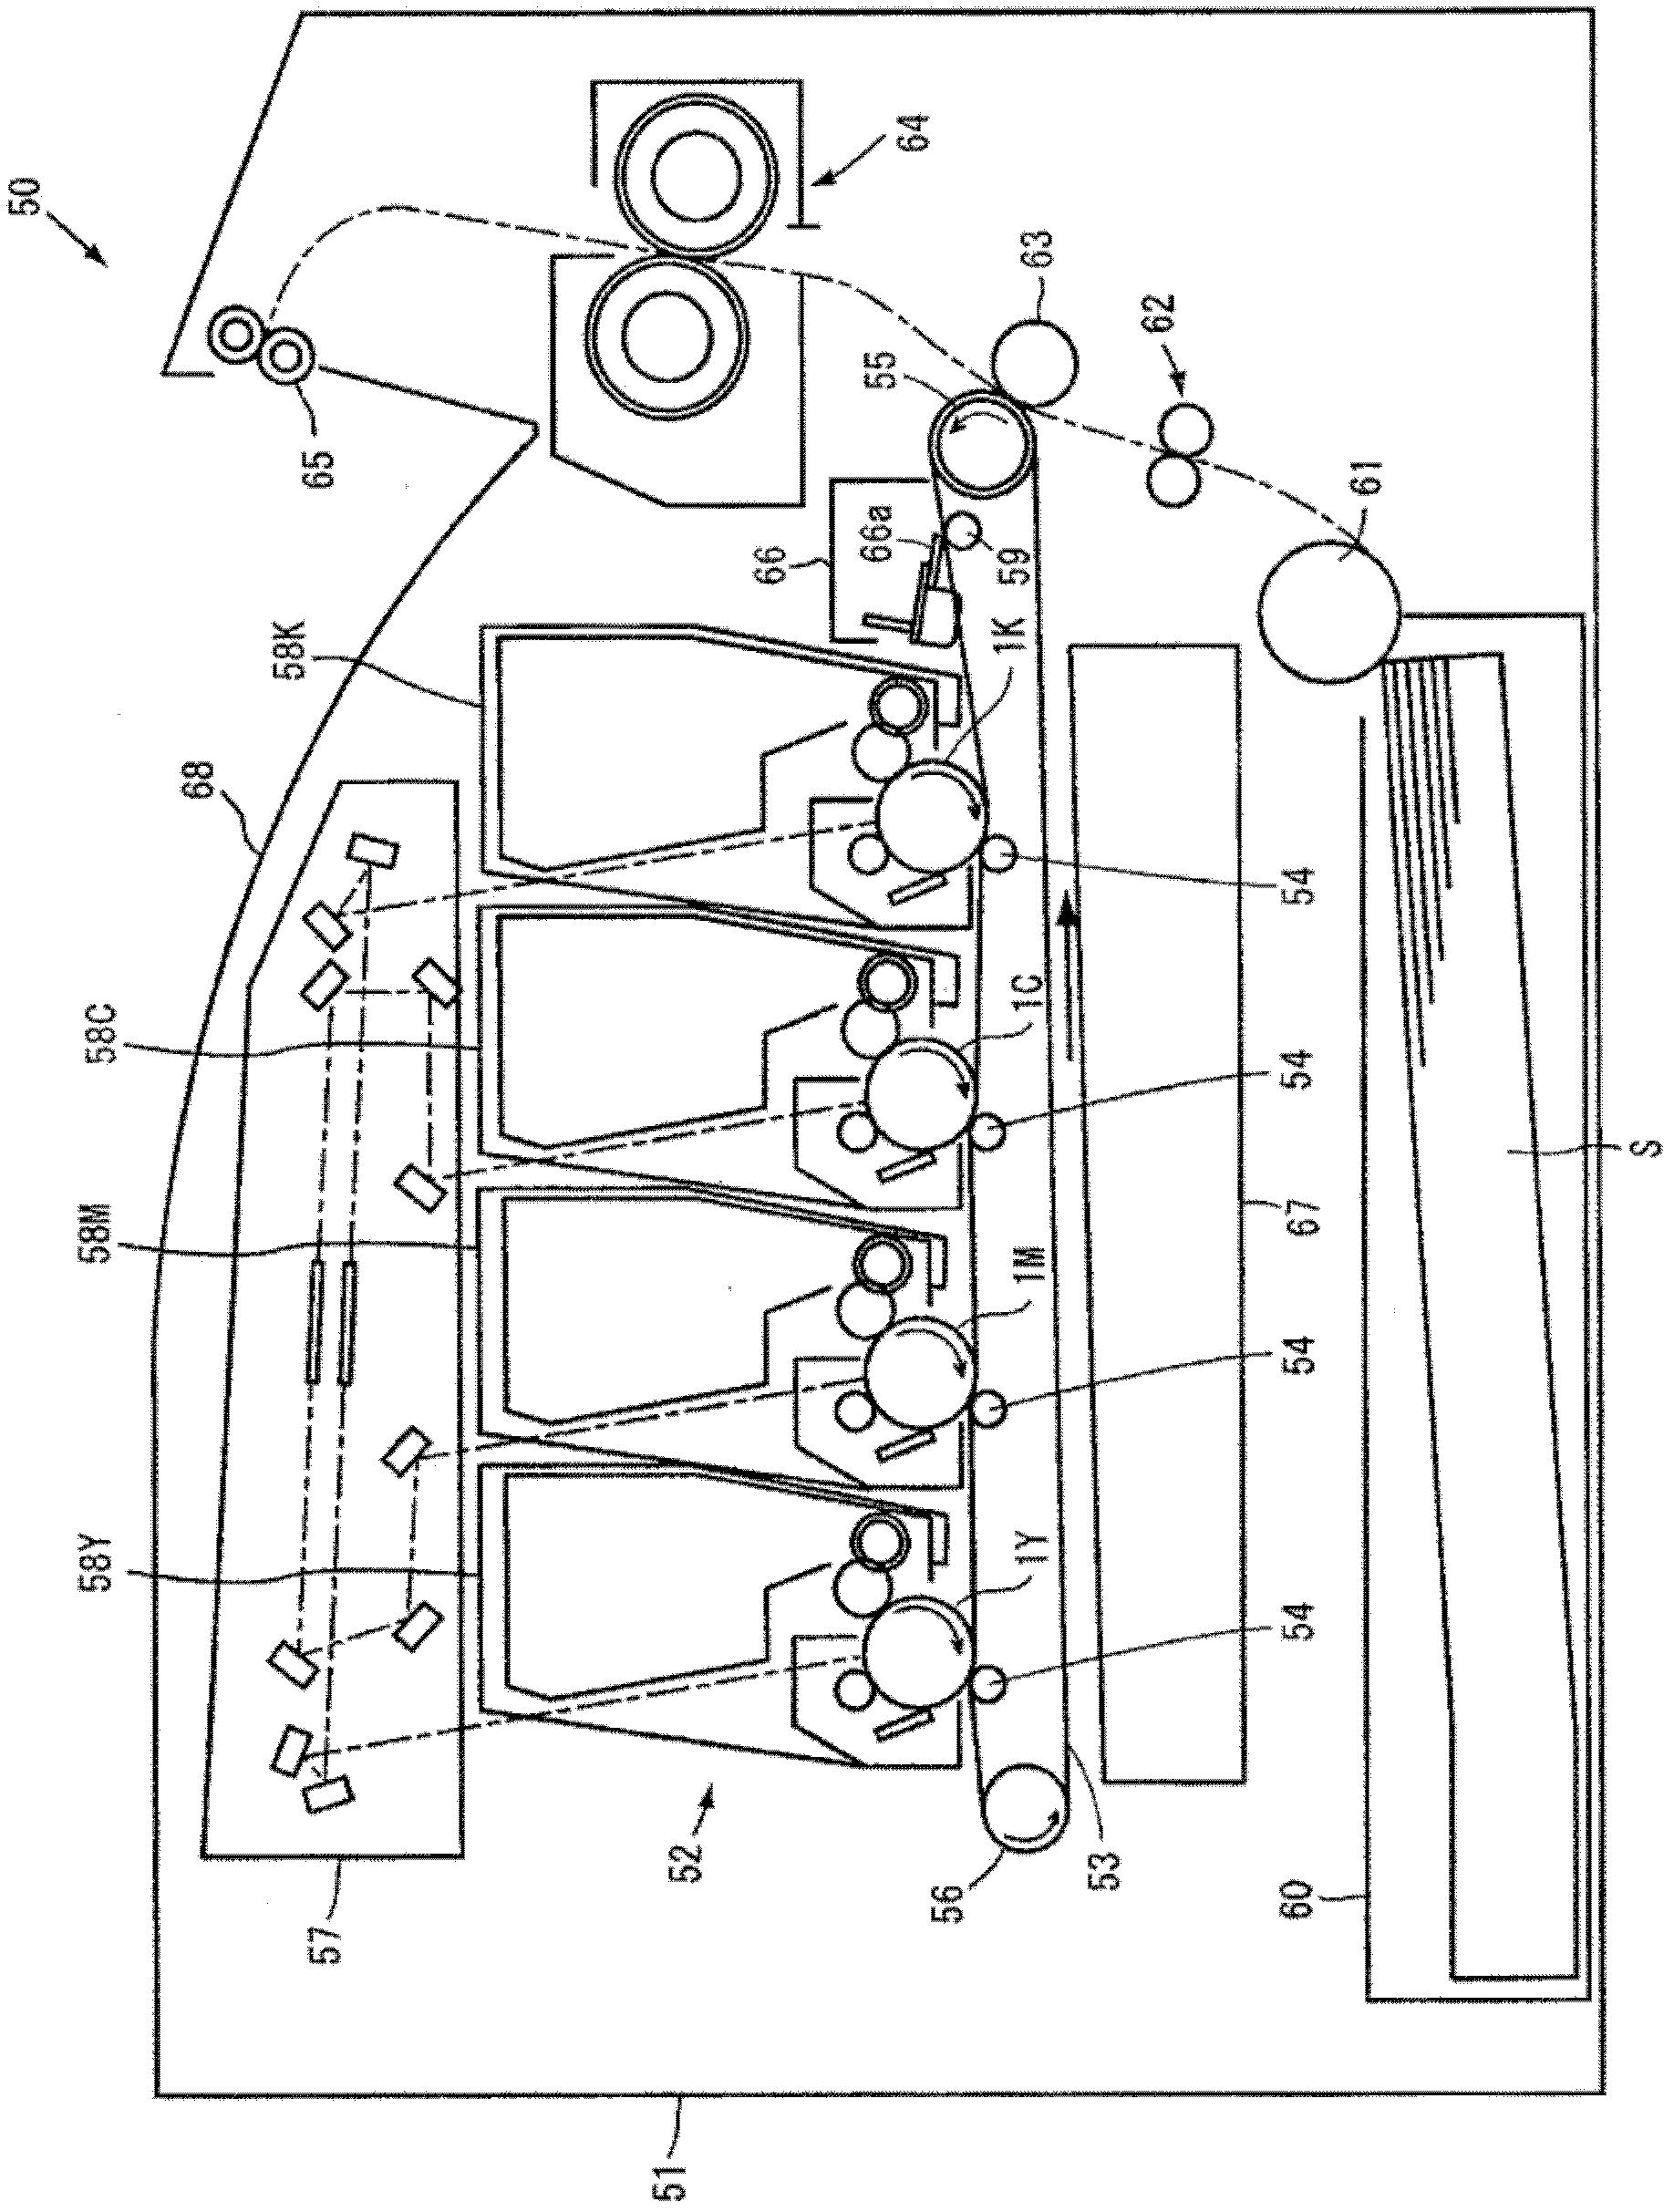 Mechanism for electrifying, method of electrifying, and conductive member